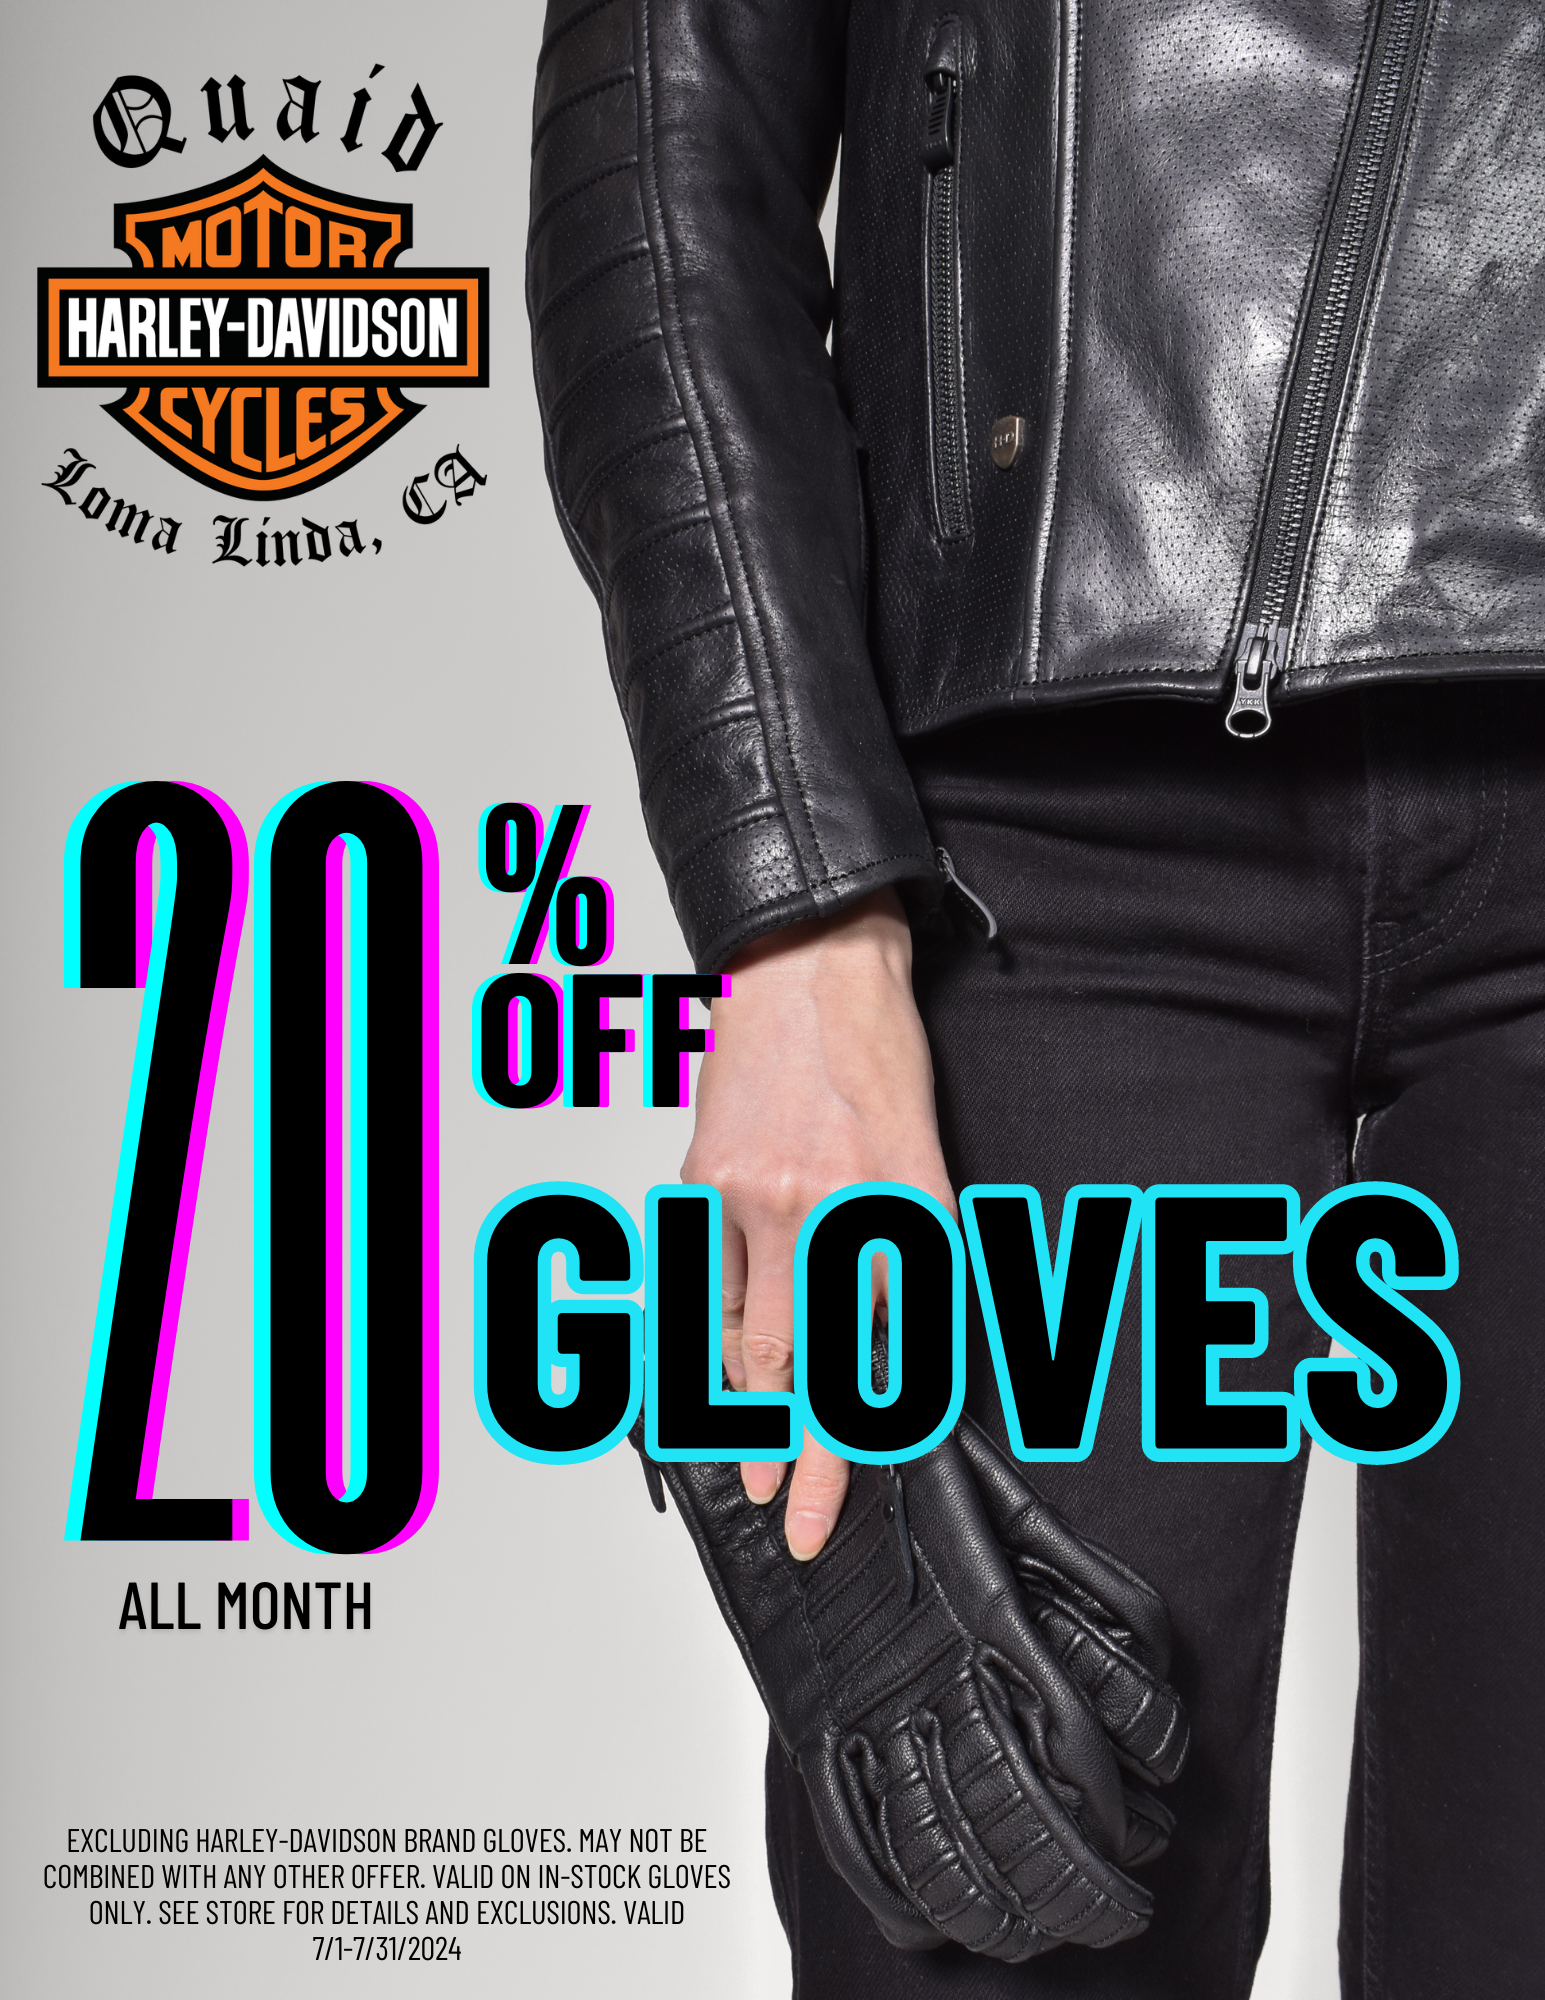 20% off of gloves at Quaid Harley-Davidson in July 2024